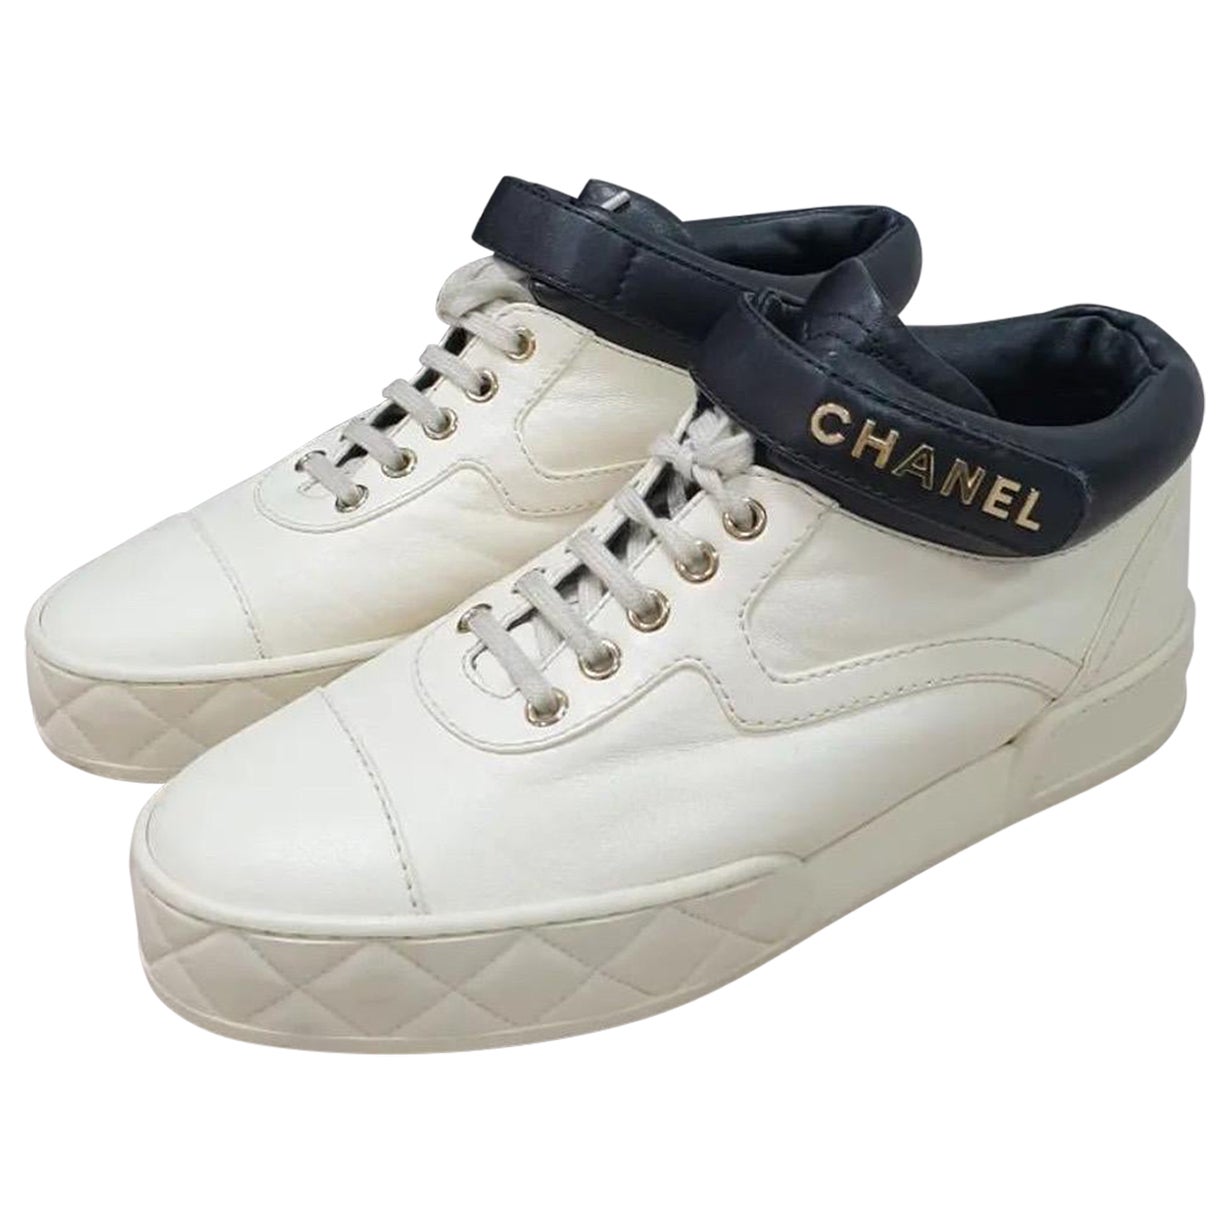 Chanel Coco Mark Trainers Leather Sneakers en vente